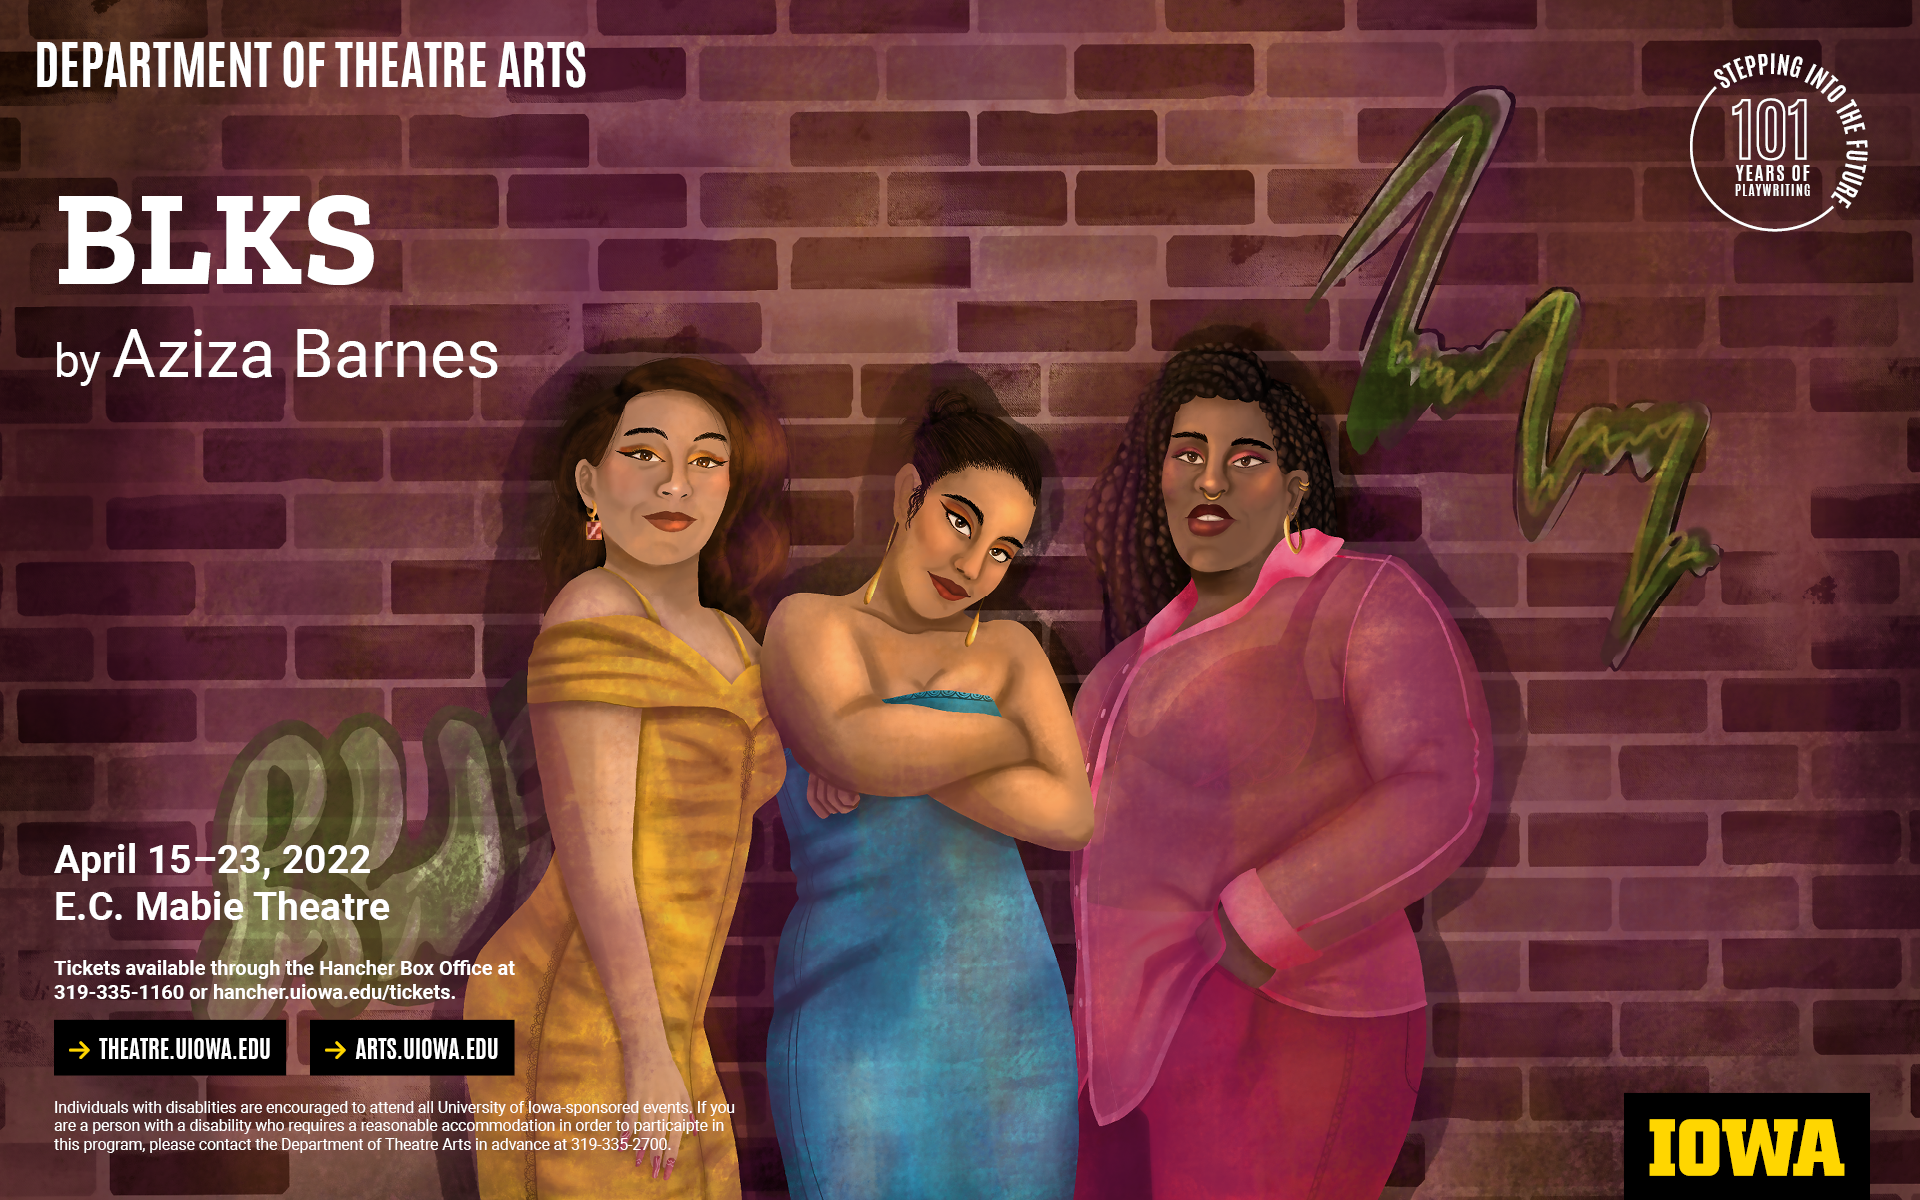 Illsturation of three women standing in front of a brick wall with graffiti on it. BLKS by Aziza Barnes. April 15-23, E.C. Mabie Theatre. Tickets are available through the Hancher Box Office at 319-335-1160 or online at hancher.uiowa.edu. theatre.uiowa.edu. arts.uiowa.edu. Individuals with disablities are encouraged to attend all University of Iowa-sponsored events. If you are a person with a disability who requires a reasonable accommodation in order to particaipte in this program, please contact the Department of Theatre Arts in advance at 319-335-2700.